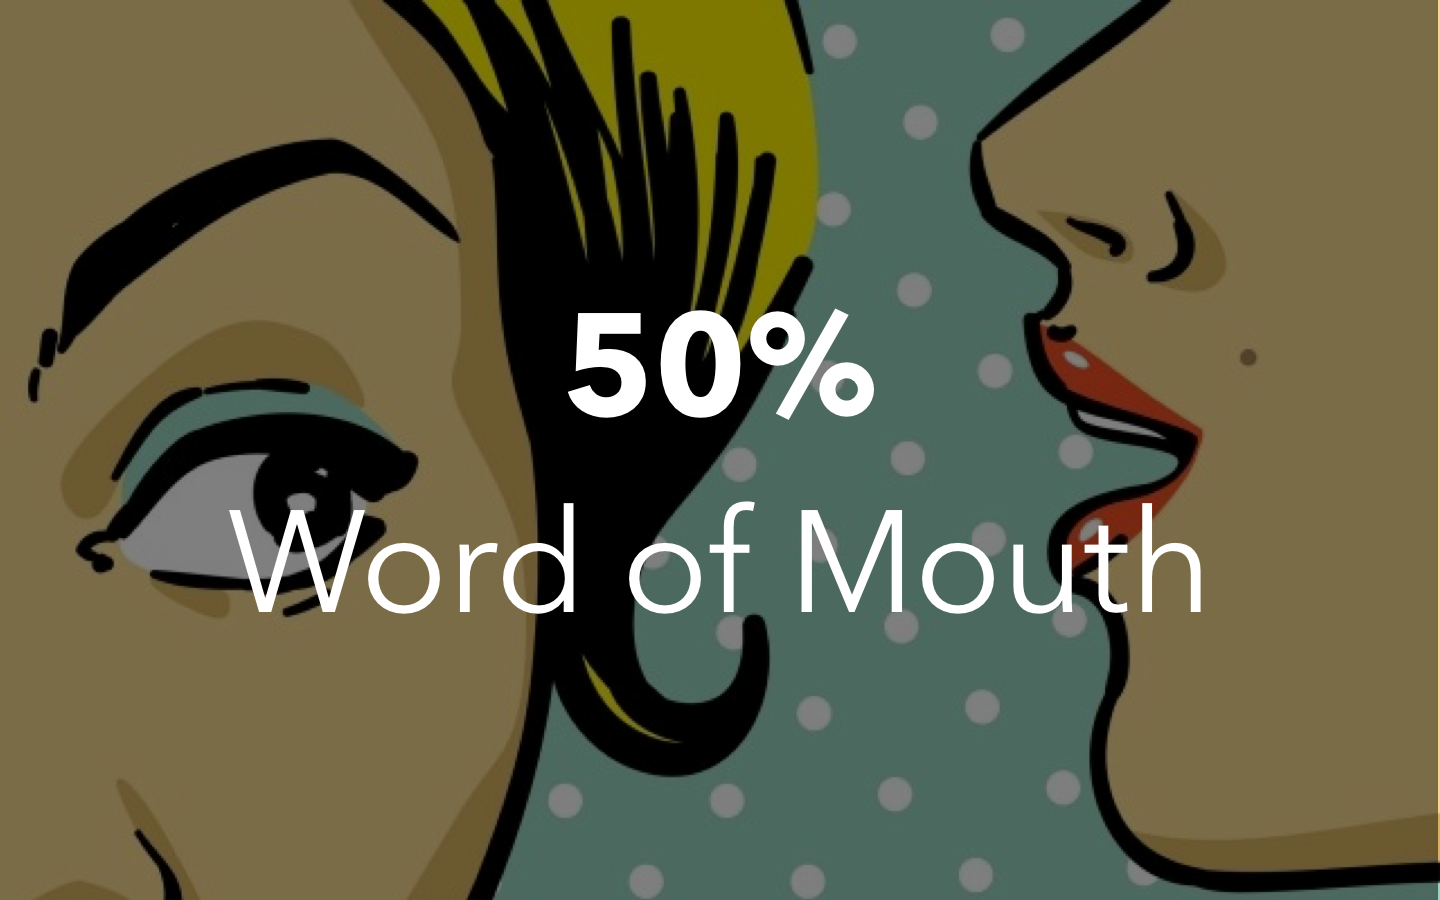 50% Word of Mouth